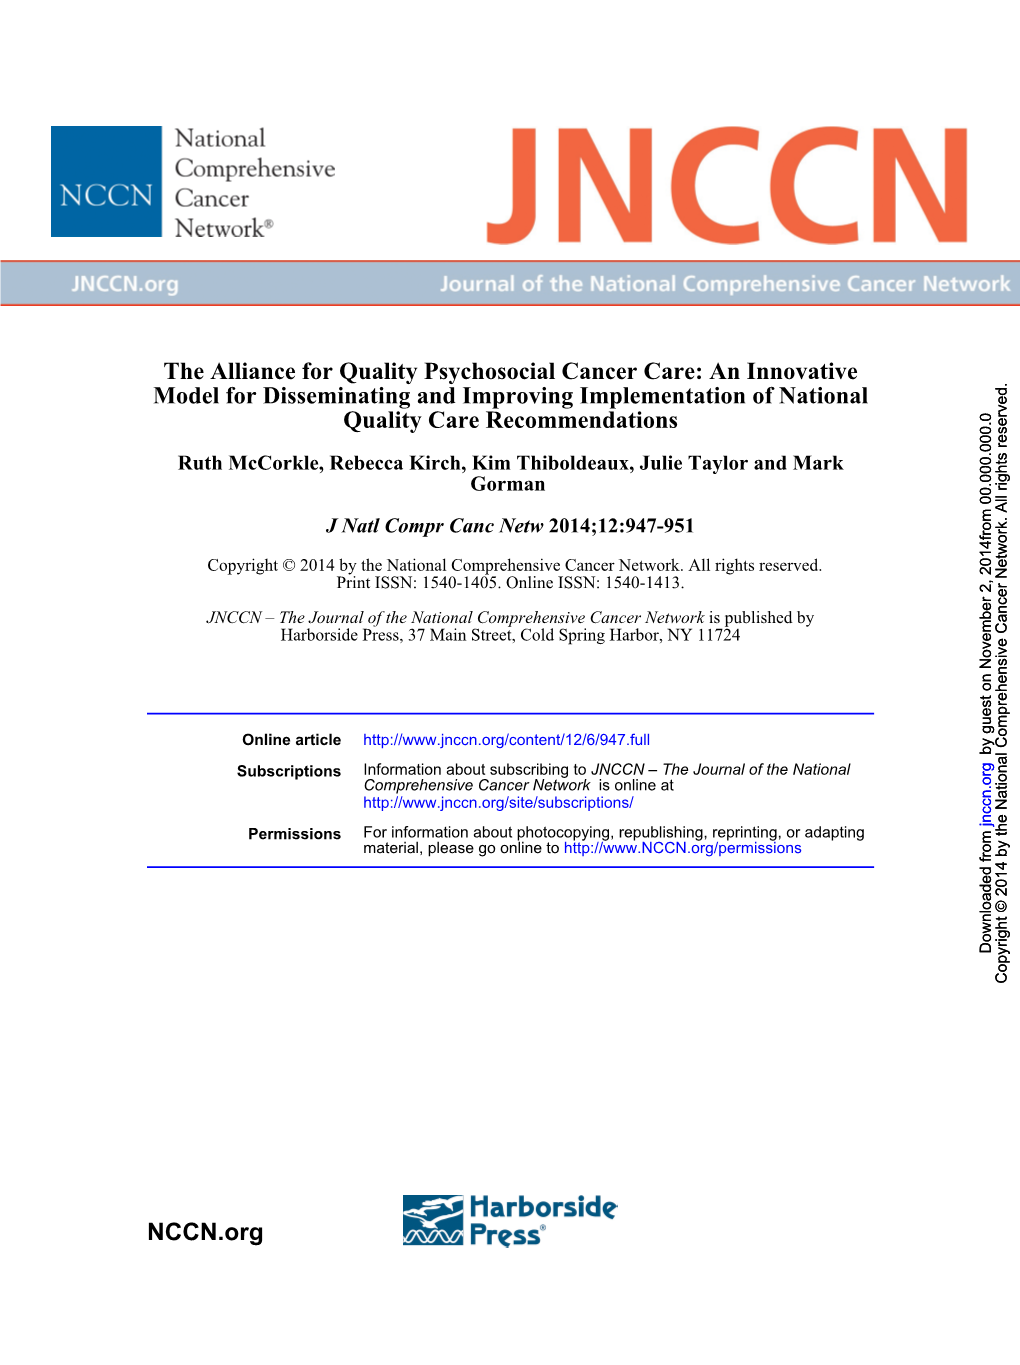 The Alliance for Quality Psychosocial Cancer Care: an Innovative Model for Disseminating and Improving Implementation of National Quality Care Recommendations